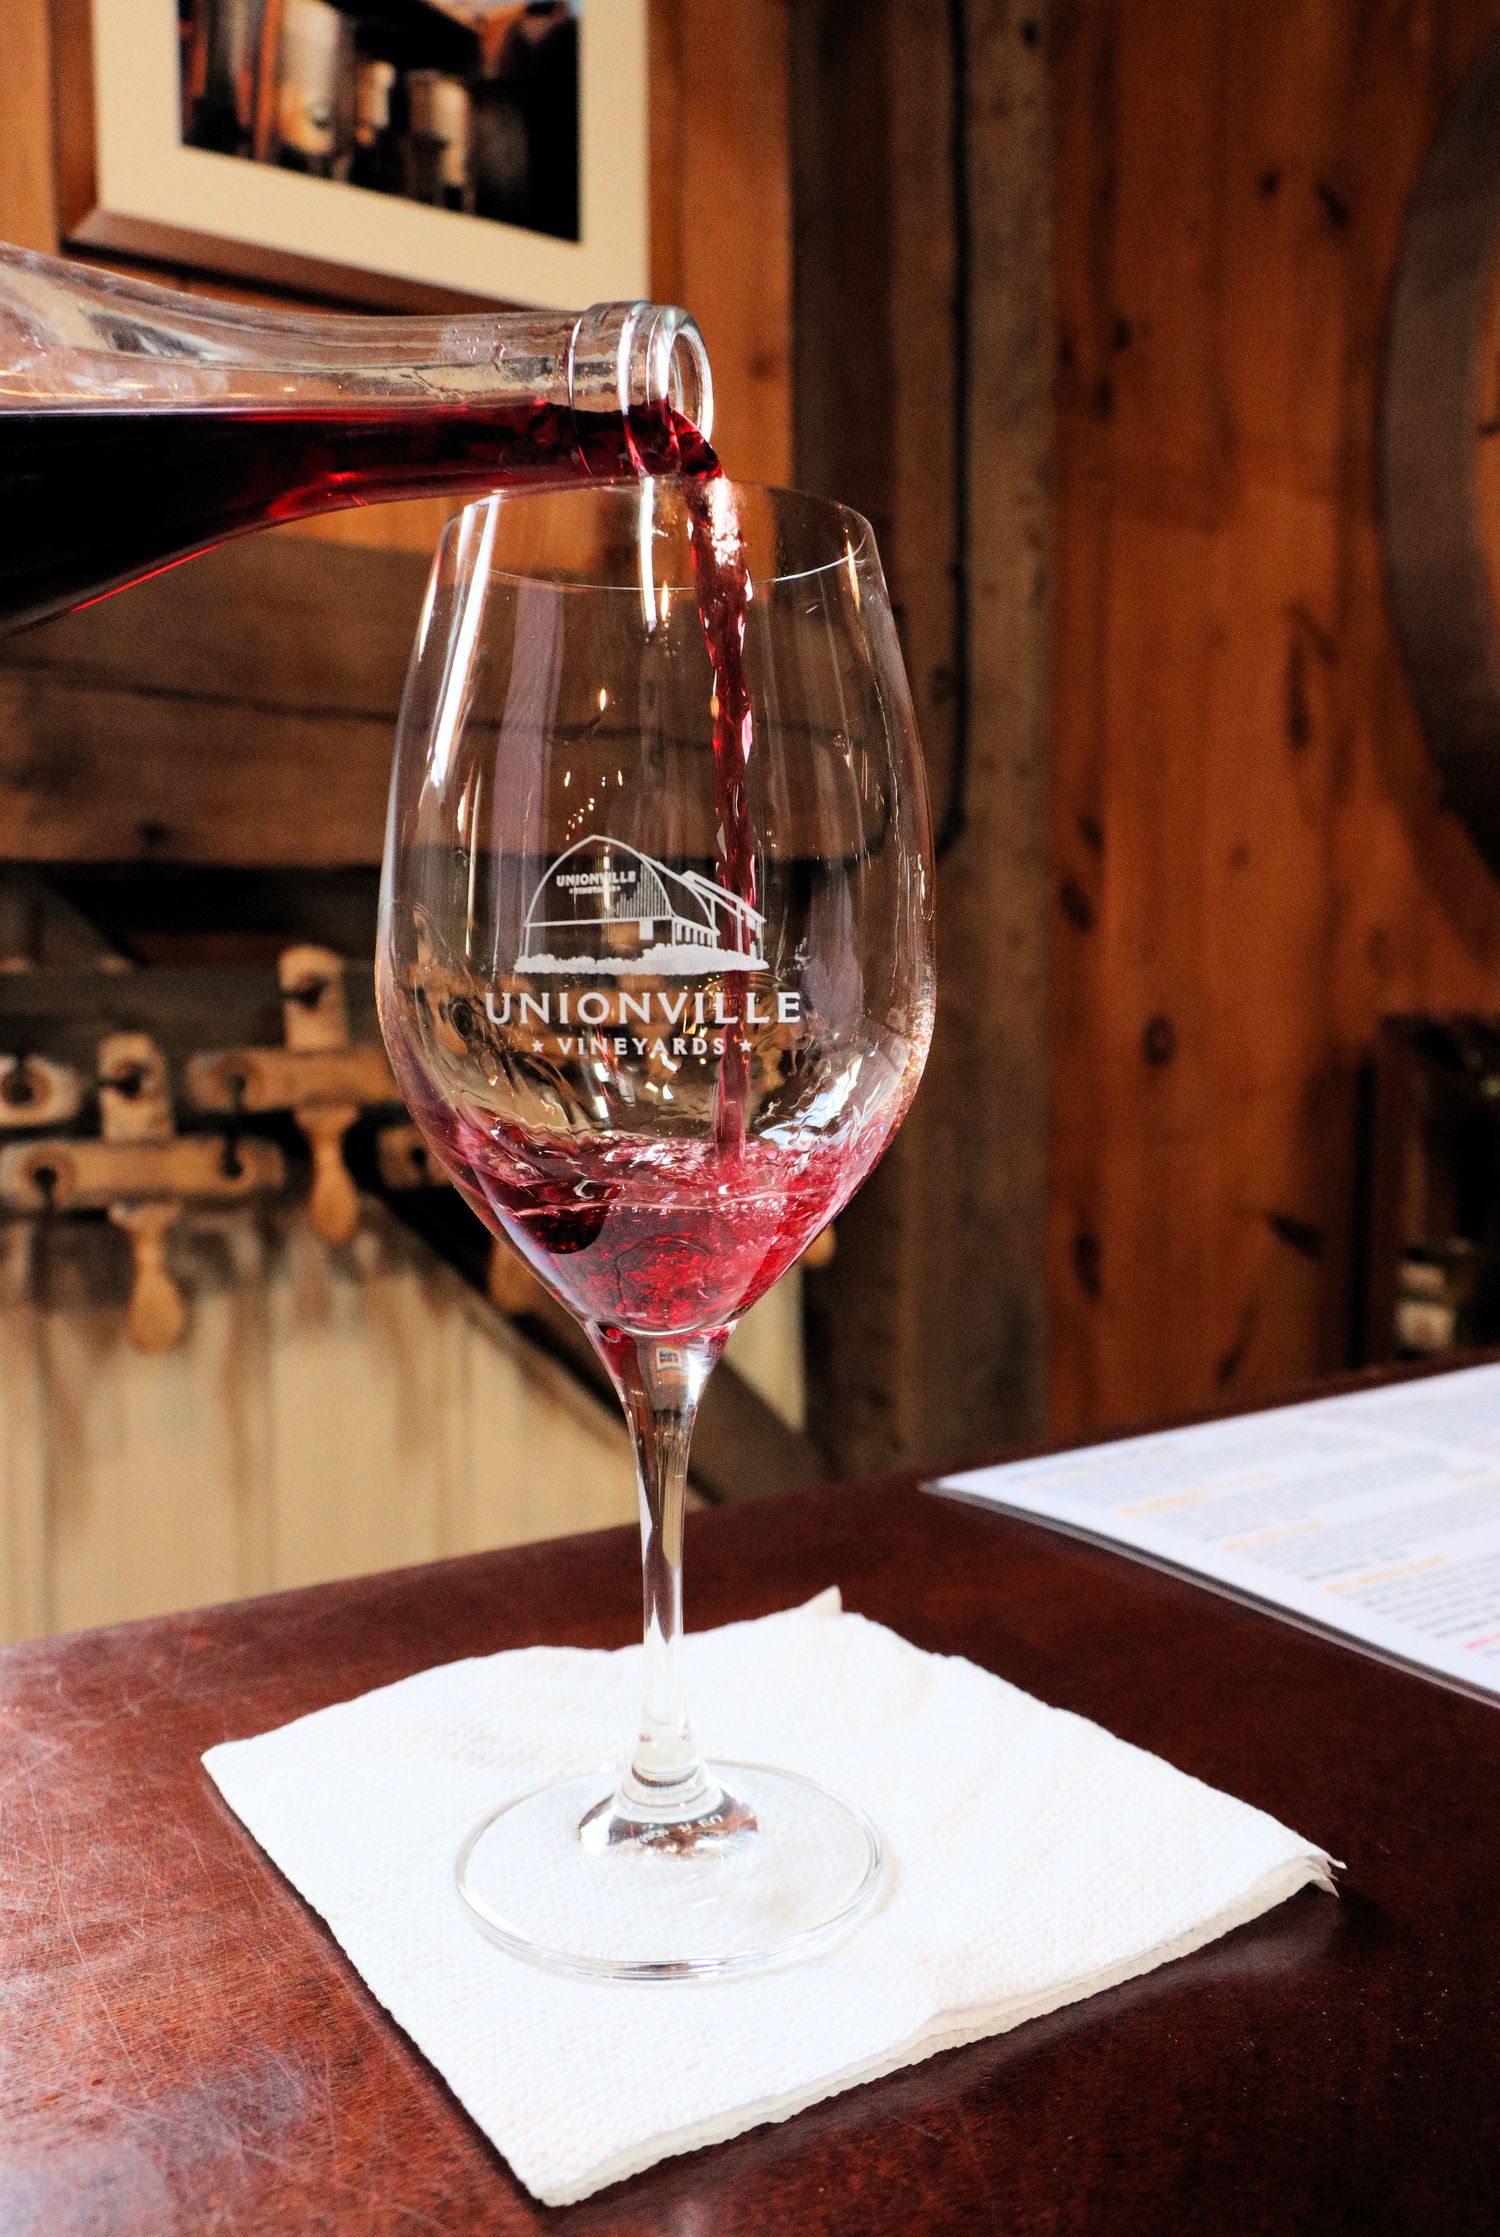 Wine being poured during a guided wine flight at Unionville Vineyards